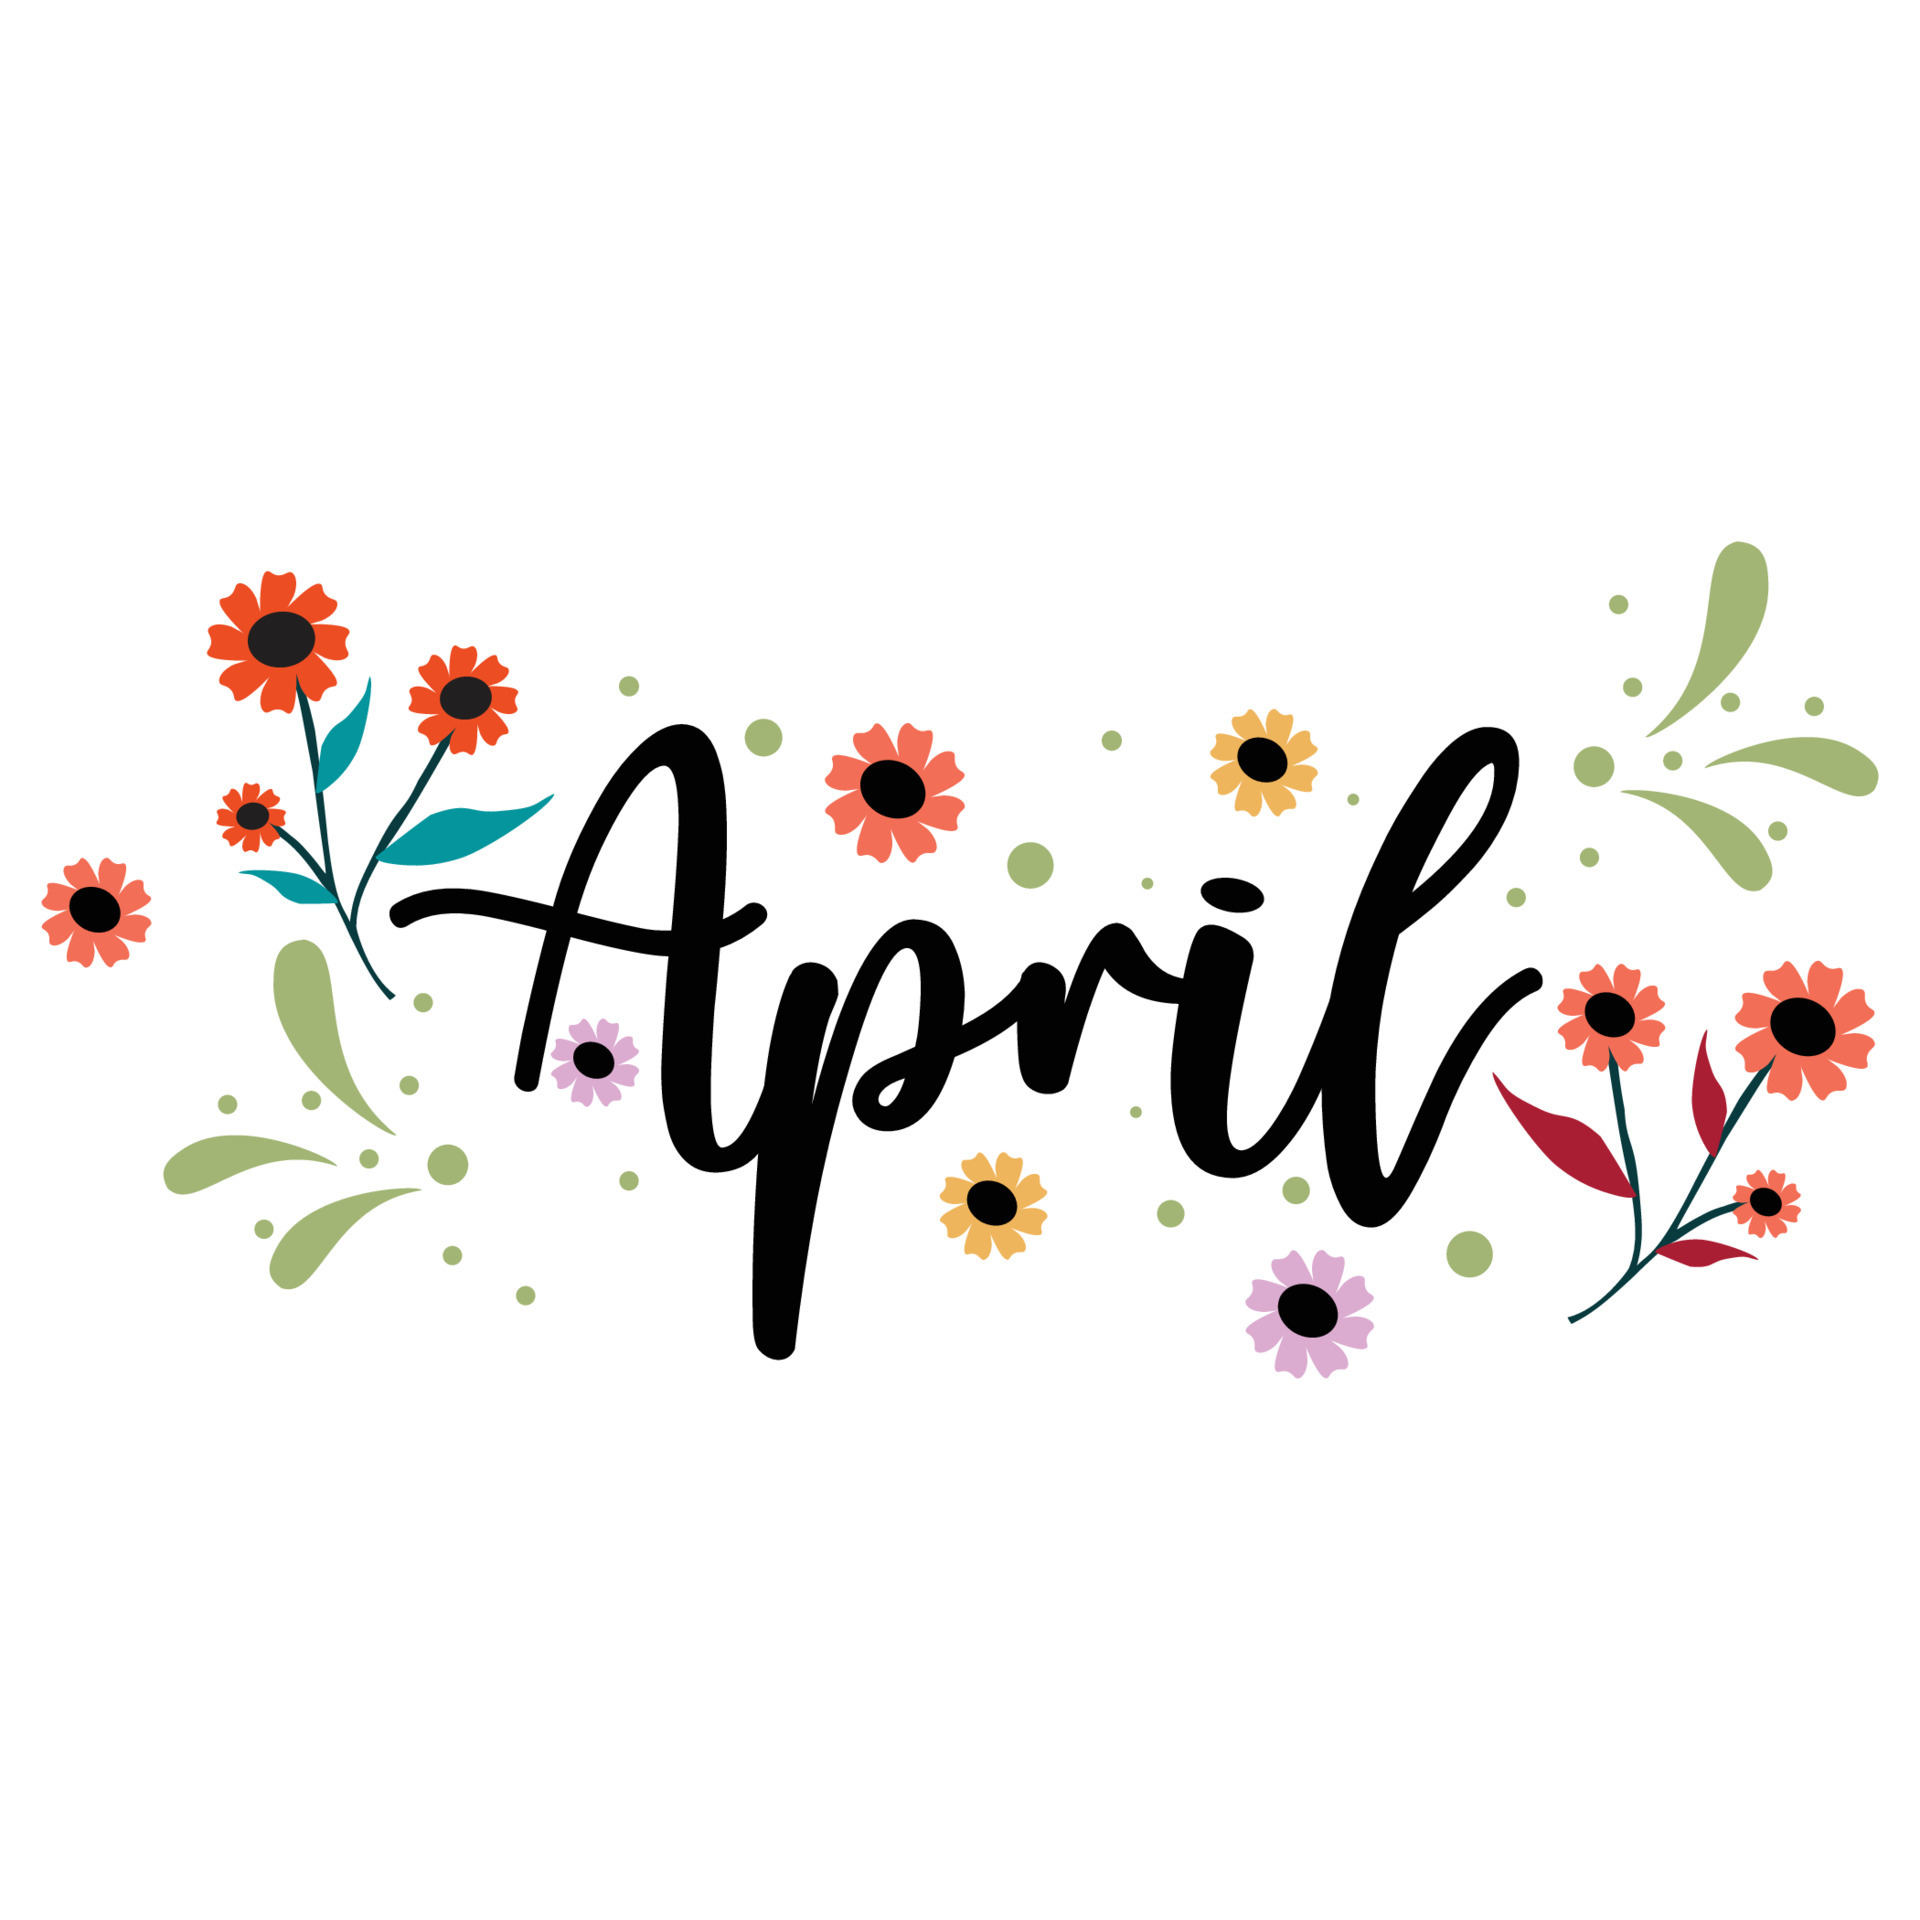 hello-april-april-month-with-flowers-and-leaves-decoration-floral-illustration-month-april-free-vector.jpg